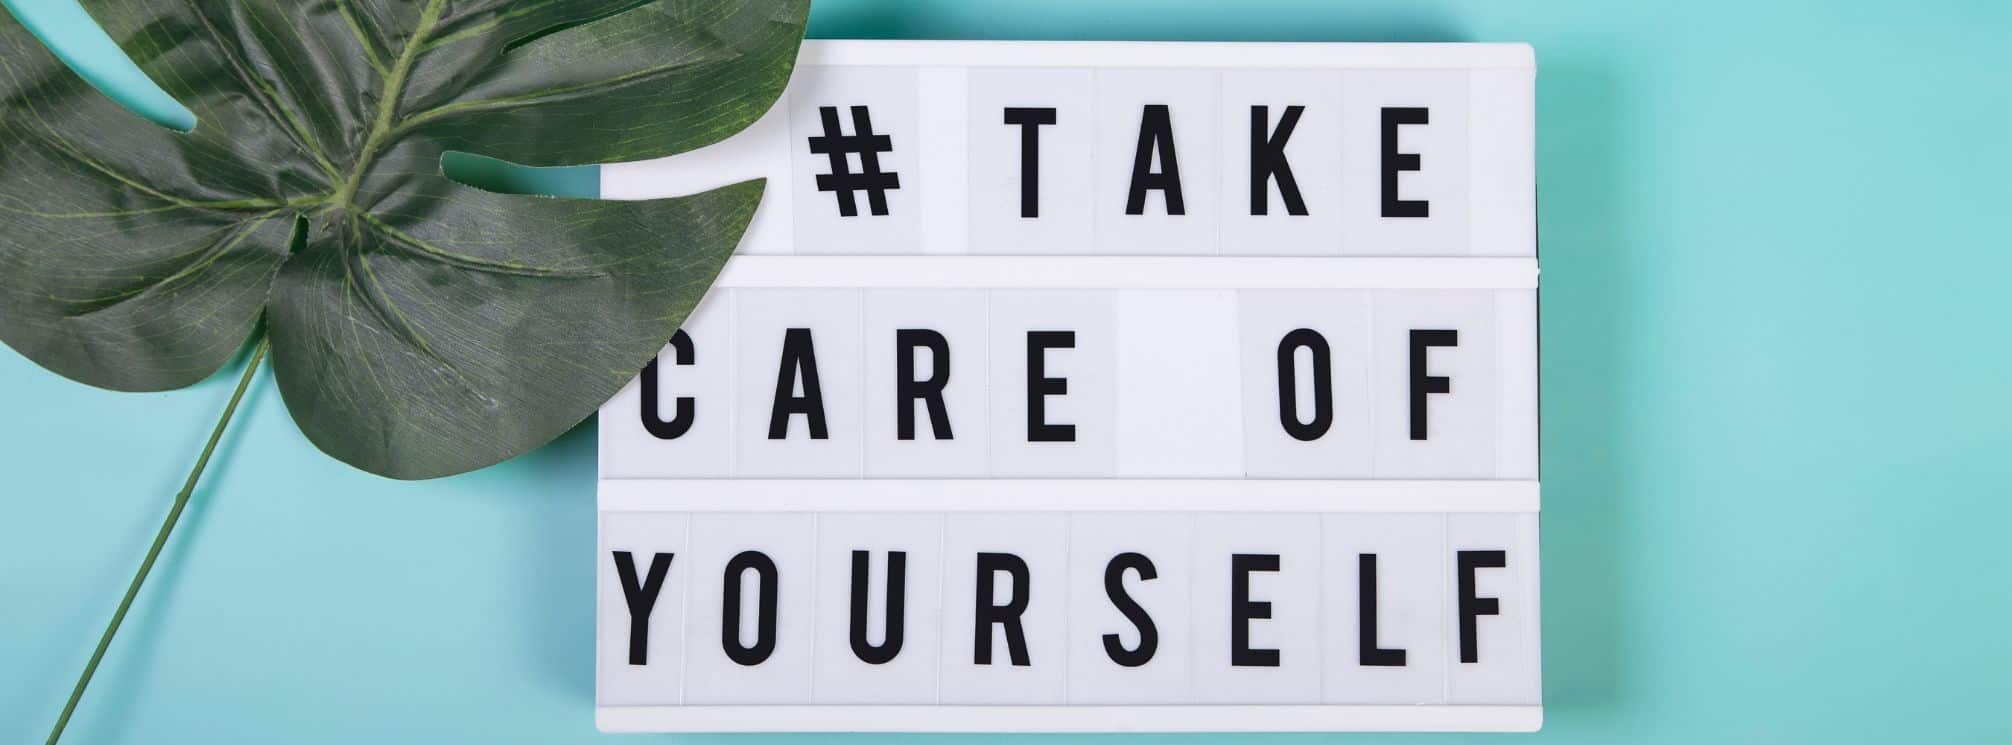 sign that says "# take care of yourself"